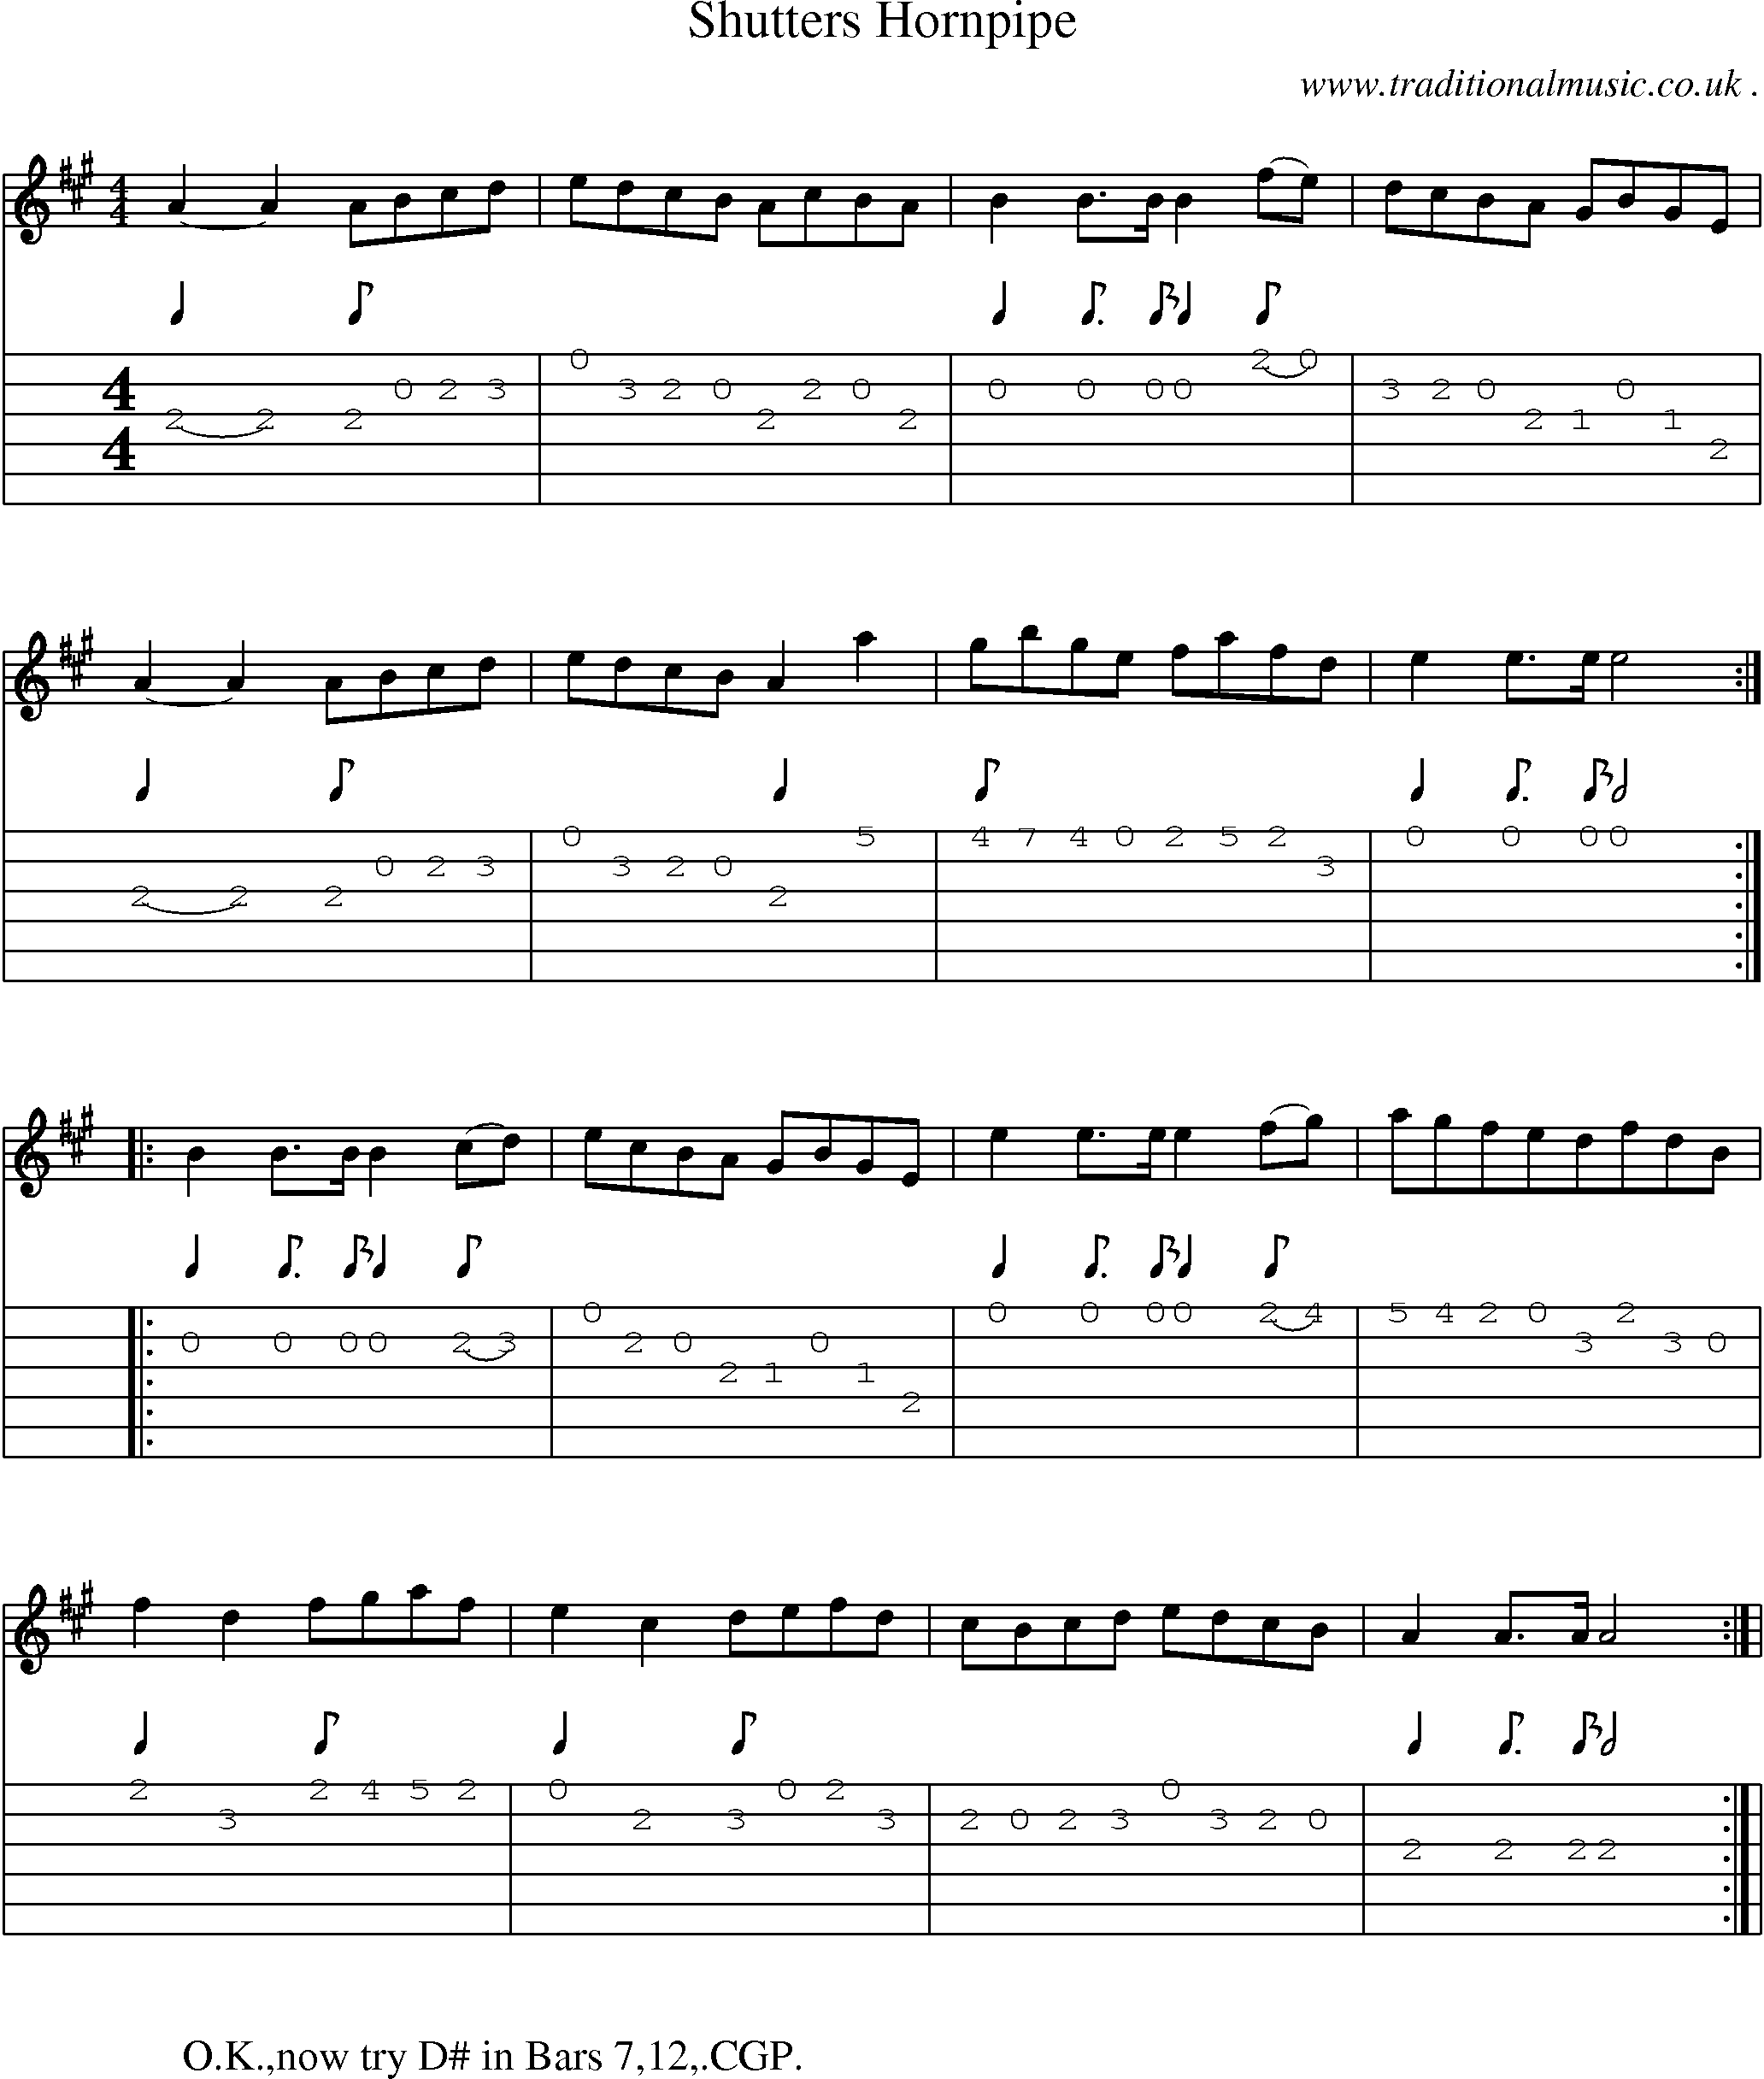 Sheet-Music and Guitar Tabs for Shutters Hornpipe